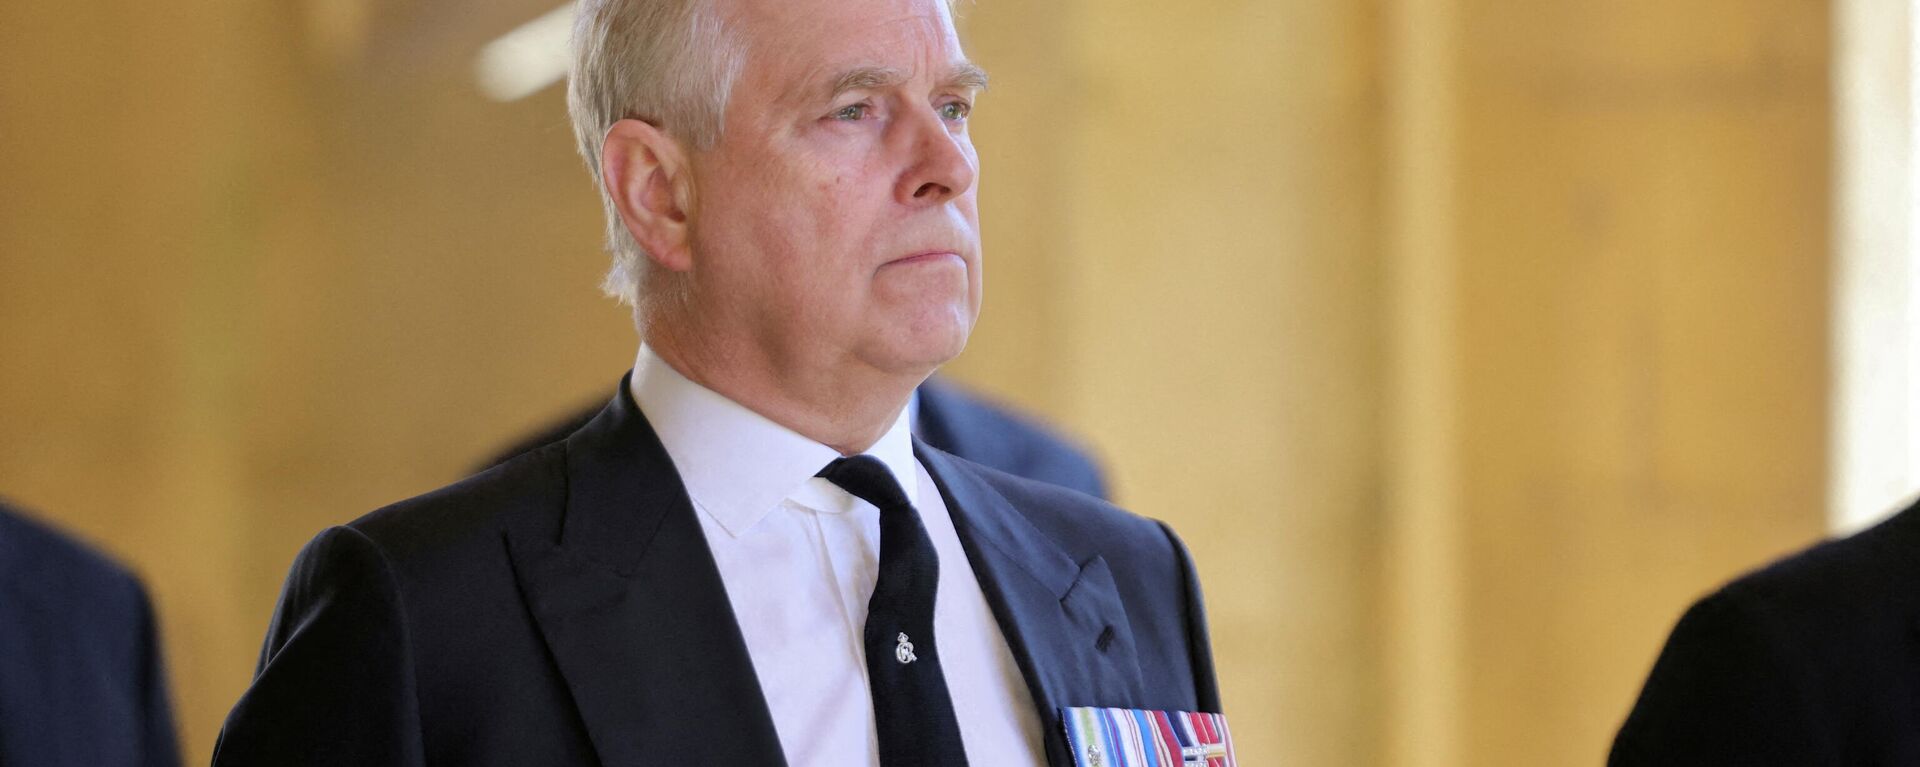 FILE PHOTO: Britain's Britain's Prince Andrew, Duke of York, looks on during the funeral of Britain's Prince Philip, husband of Queen Elizabeth, who died at the age of 99, in Windsor, Britain, April 17, 2021 - Sputnik International, 1920, 18.02.2022